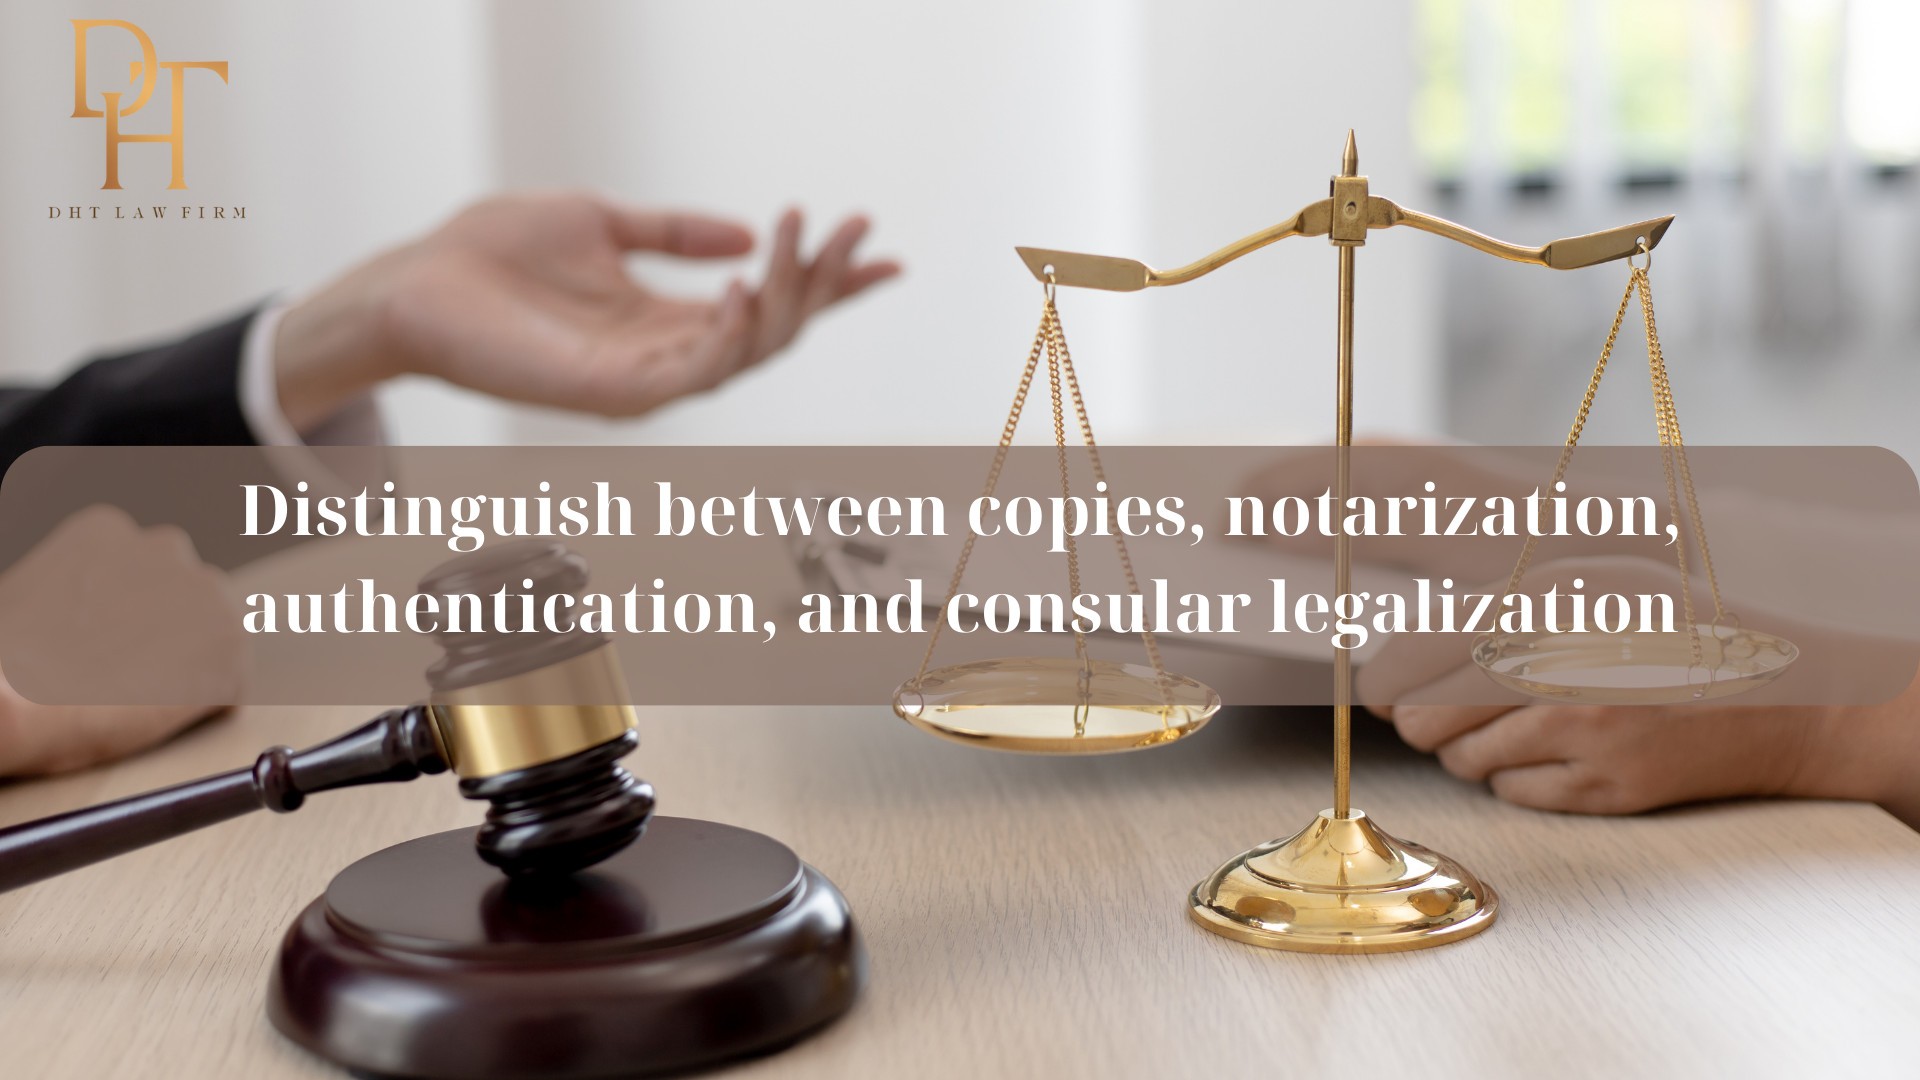 DISTINGUISH BETWEEN COPIES, NOTARIZATION, AUTHENTICATION, AND CONSULAR LEGALIZATION